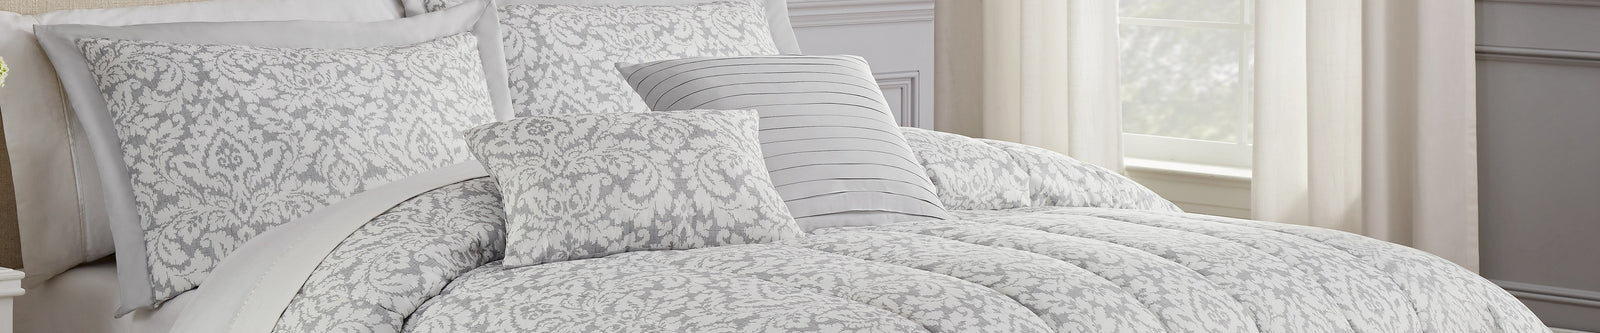 Traditions by Waverly® Bedding